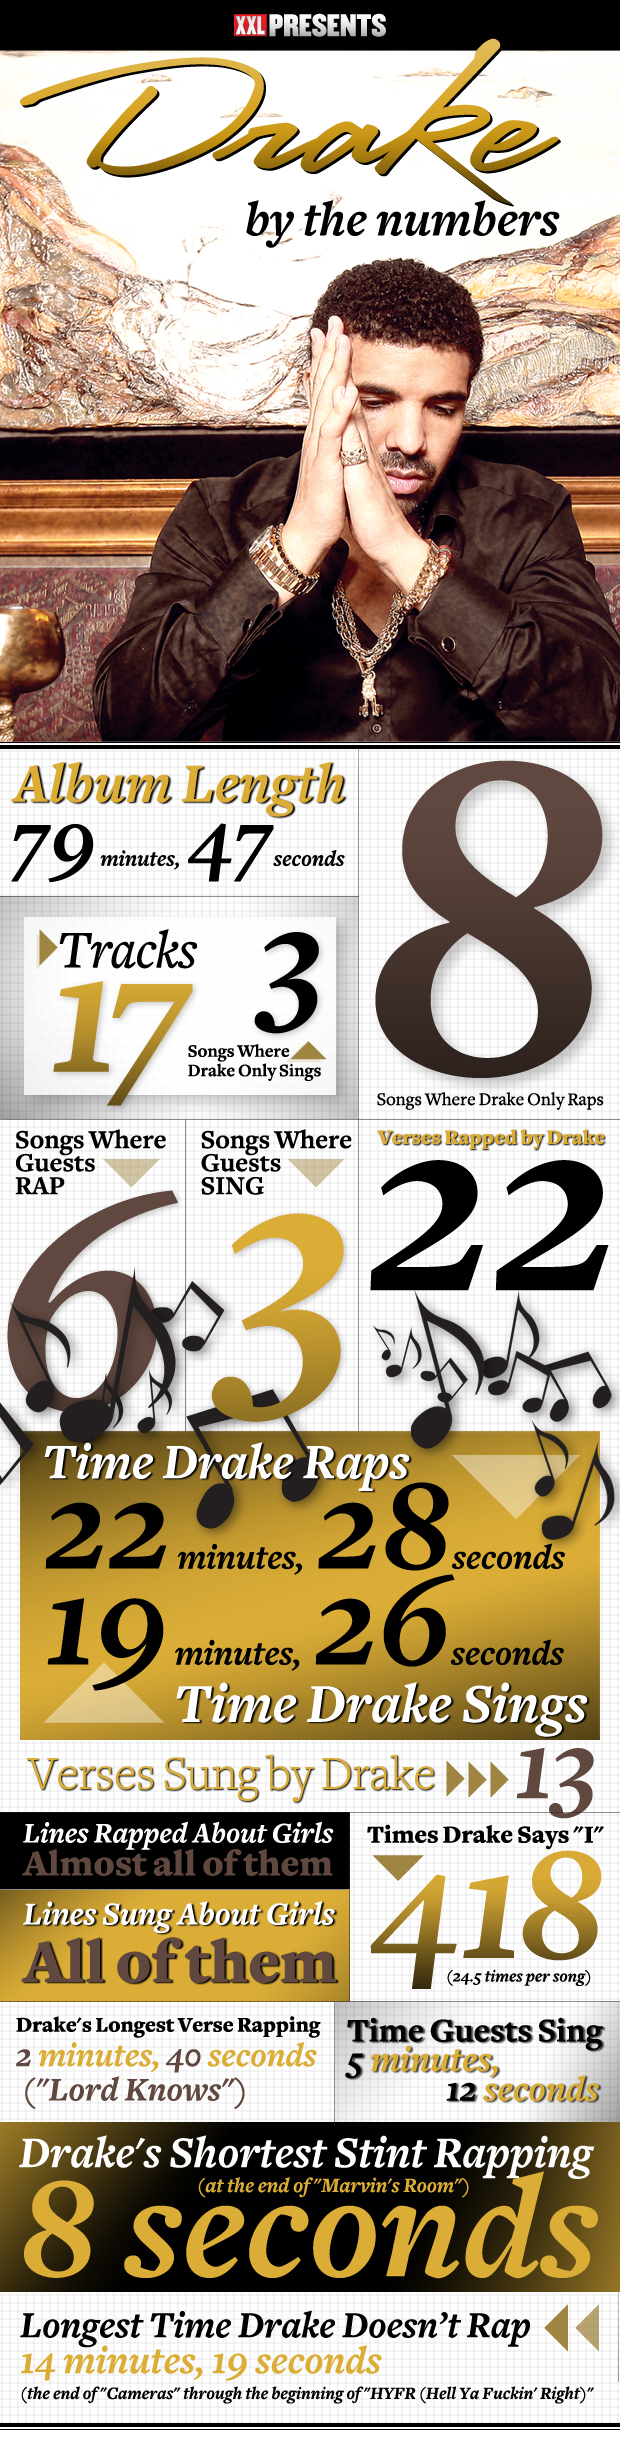 DRAKE_by_the_numbers5 Drake's Take Care Album Breakdown by The Numbers (How Long He Rap vs Sing, Number of Times He said "I", & etc) 